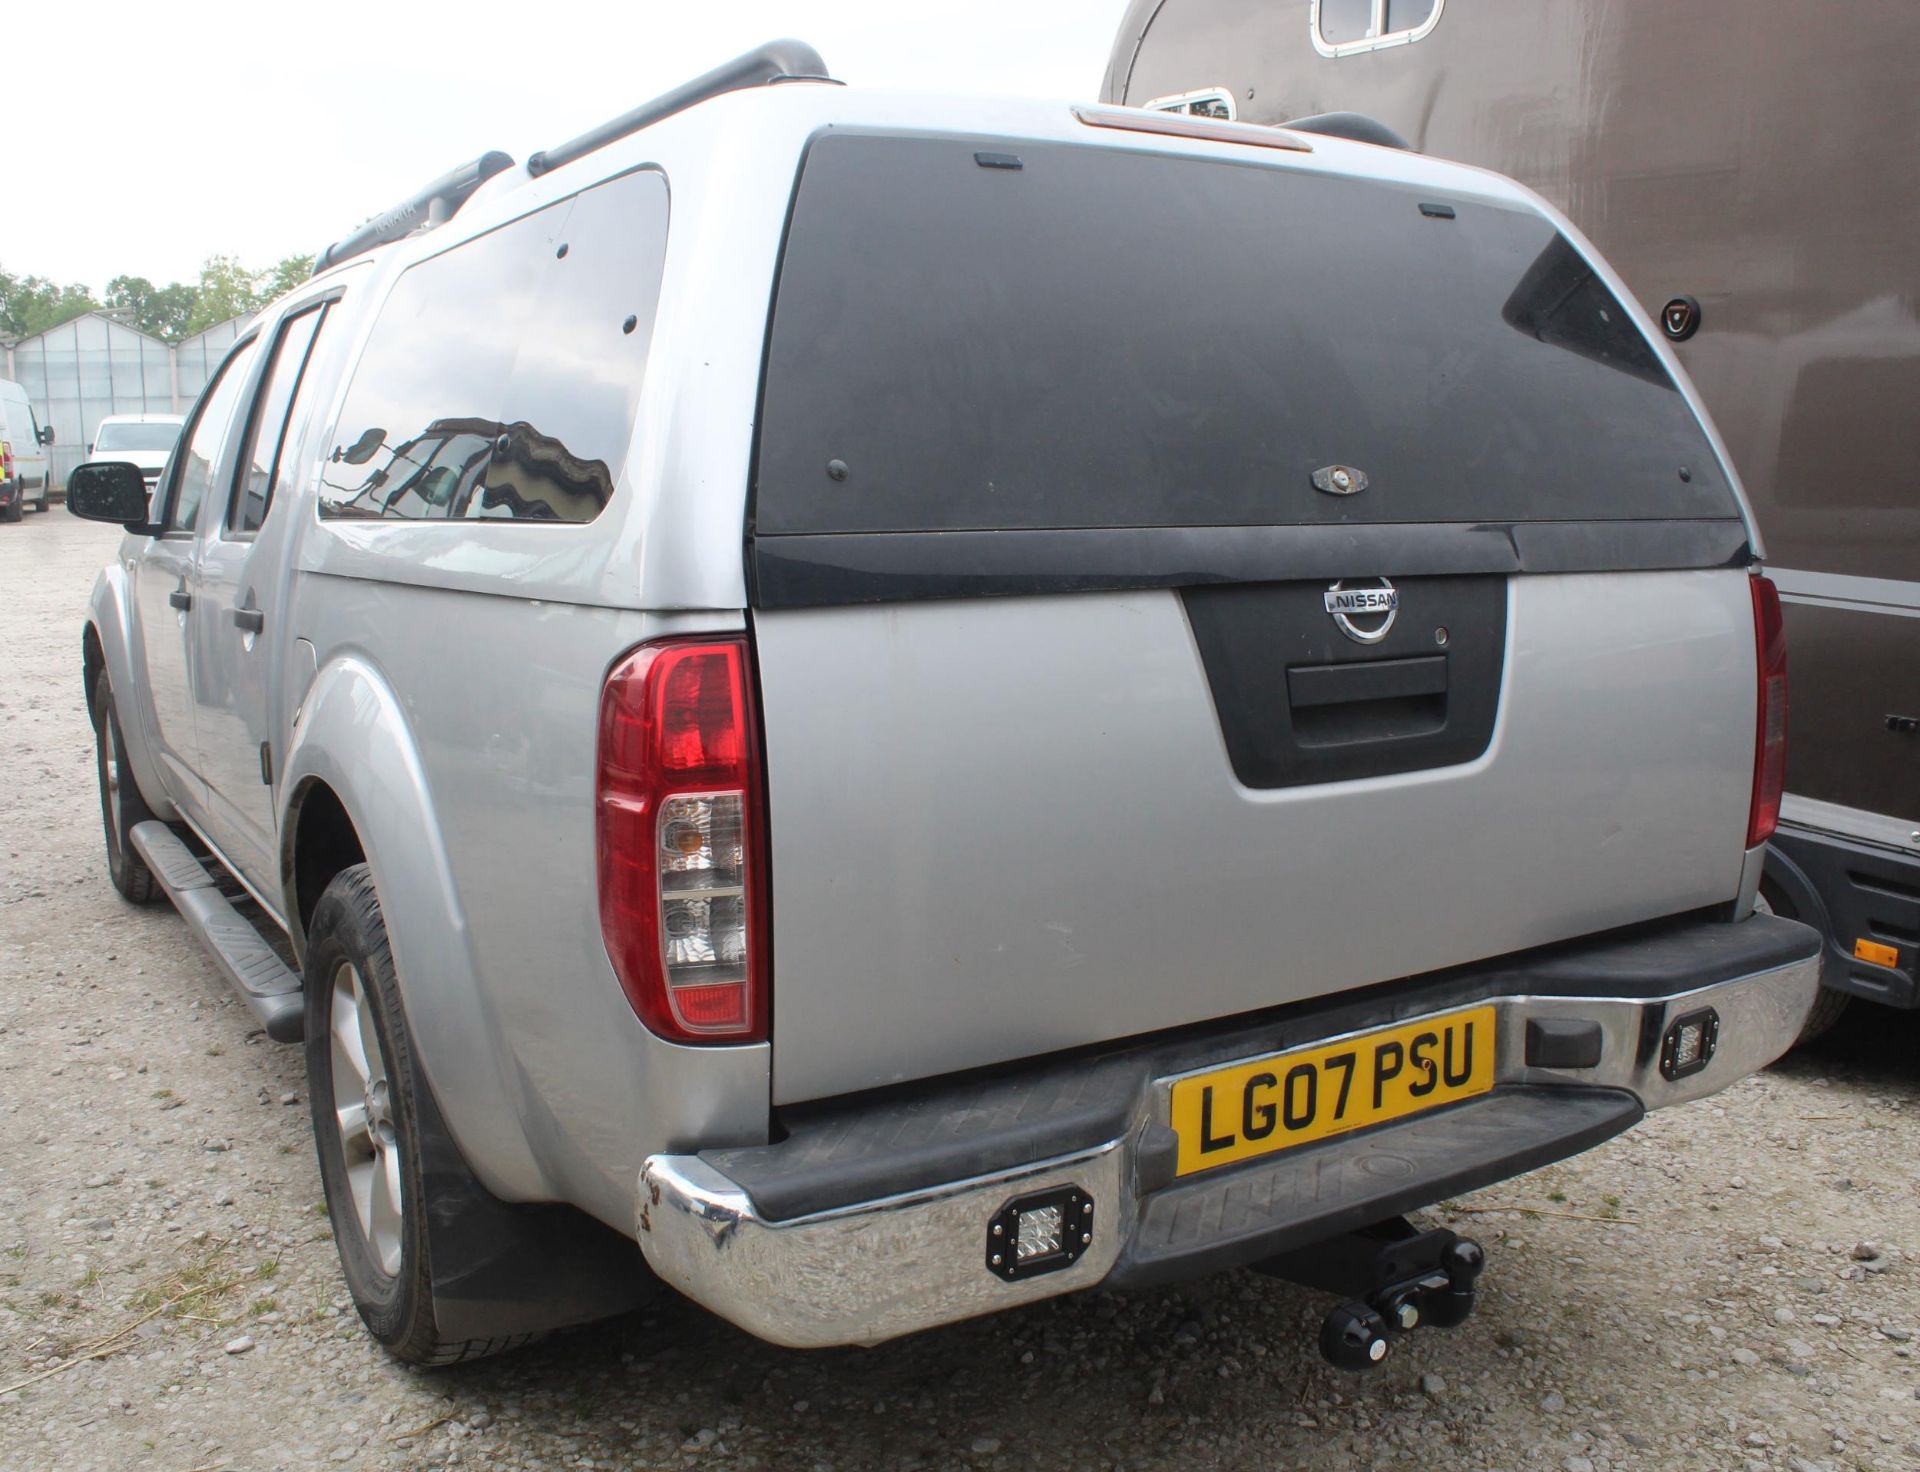 A SILVER 2007 NISSAN NAVARA AUTO MATIC PICKUP, WITH DIESEL ENGINE AND AUTOMATIC TRANSITION, - Image 3 of 3